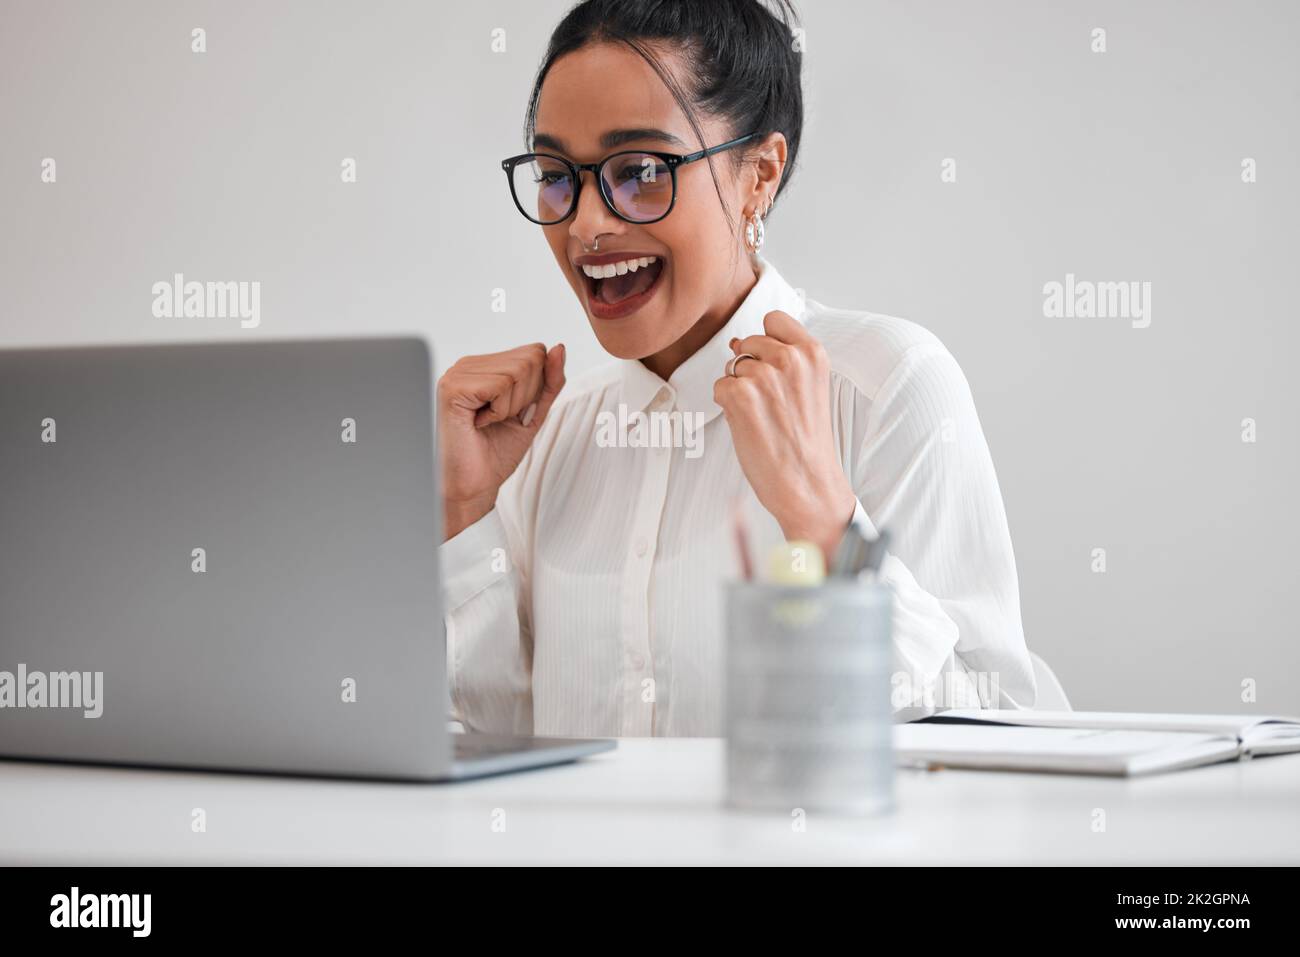 Yes Another client on boarded. Cropped shot of an attractive young businesswoman cheering while working on her laptop at a desk in the office. Stock Photo